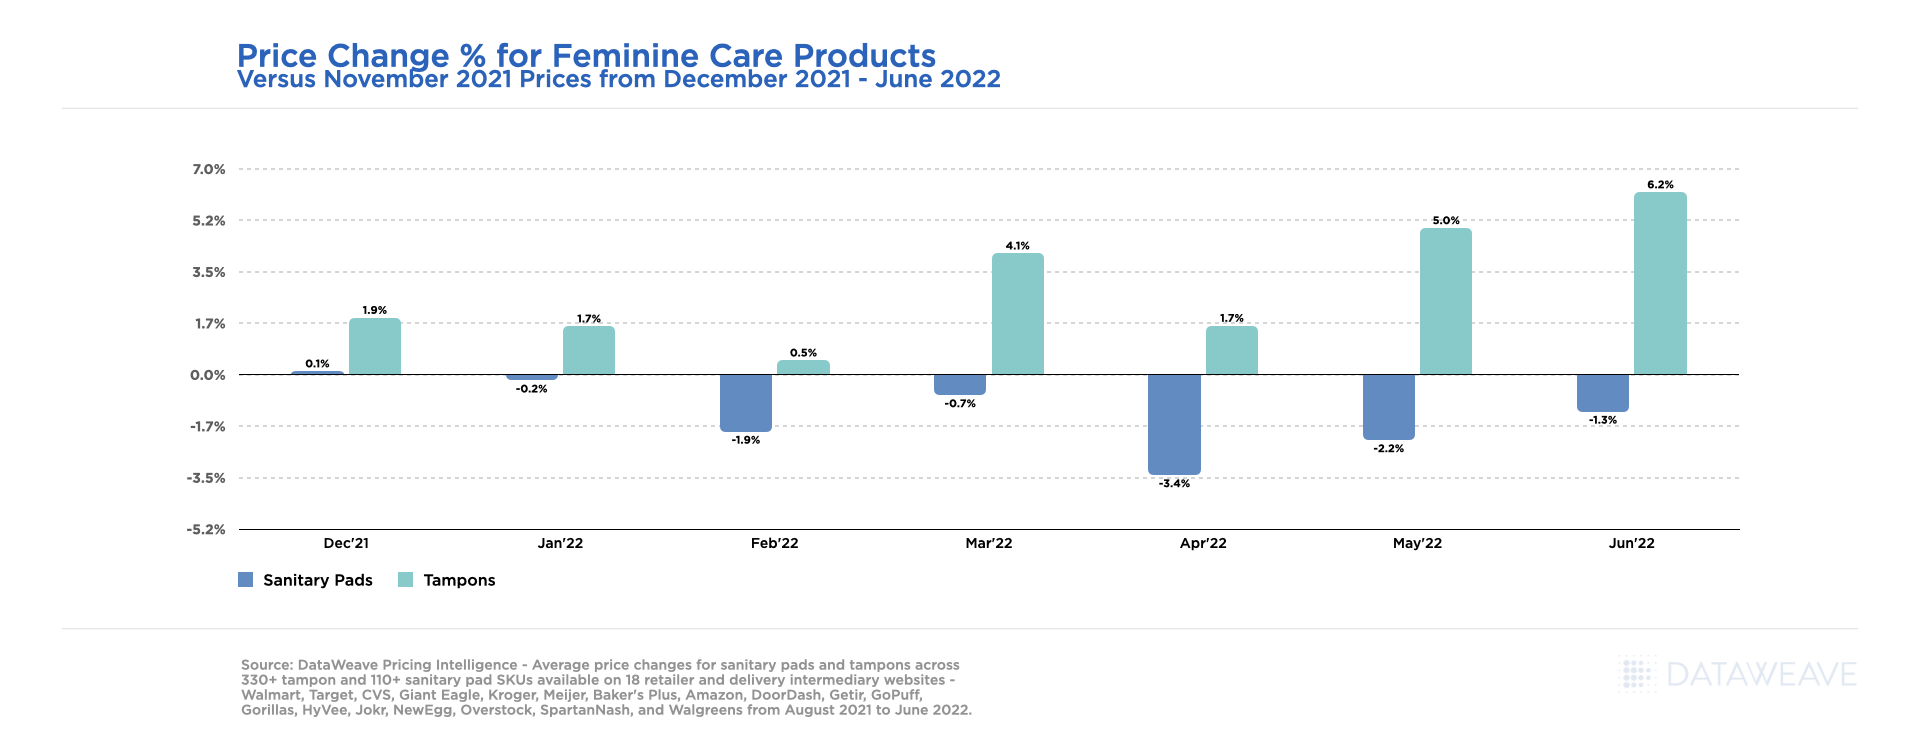 Price Change for Feminine Care Products - June 2022